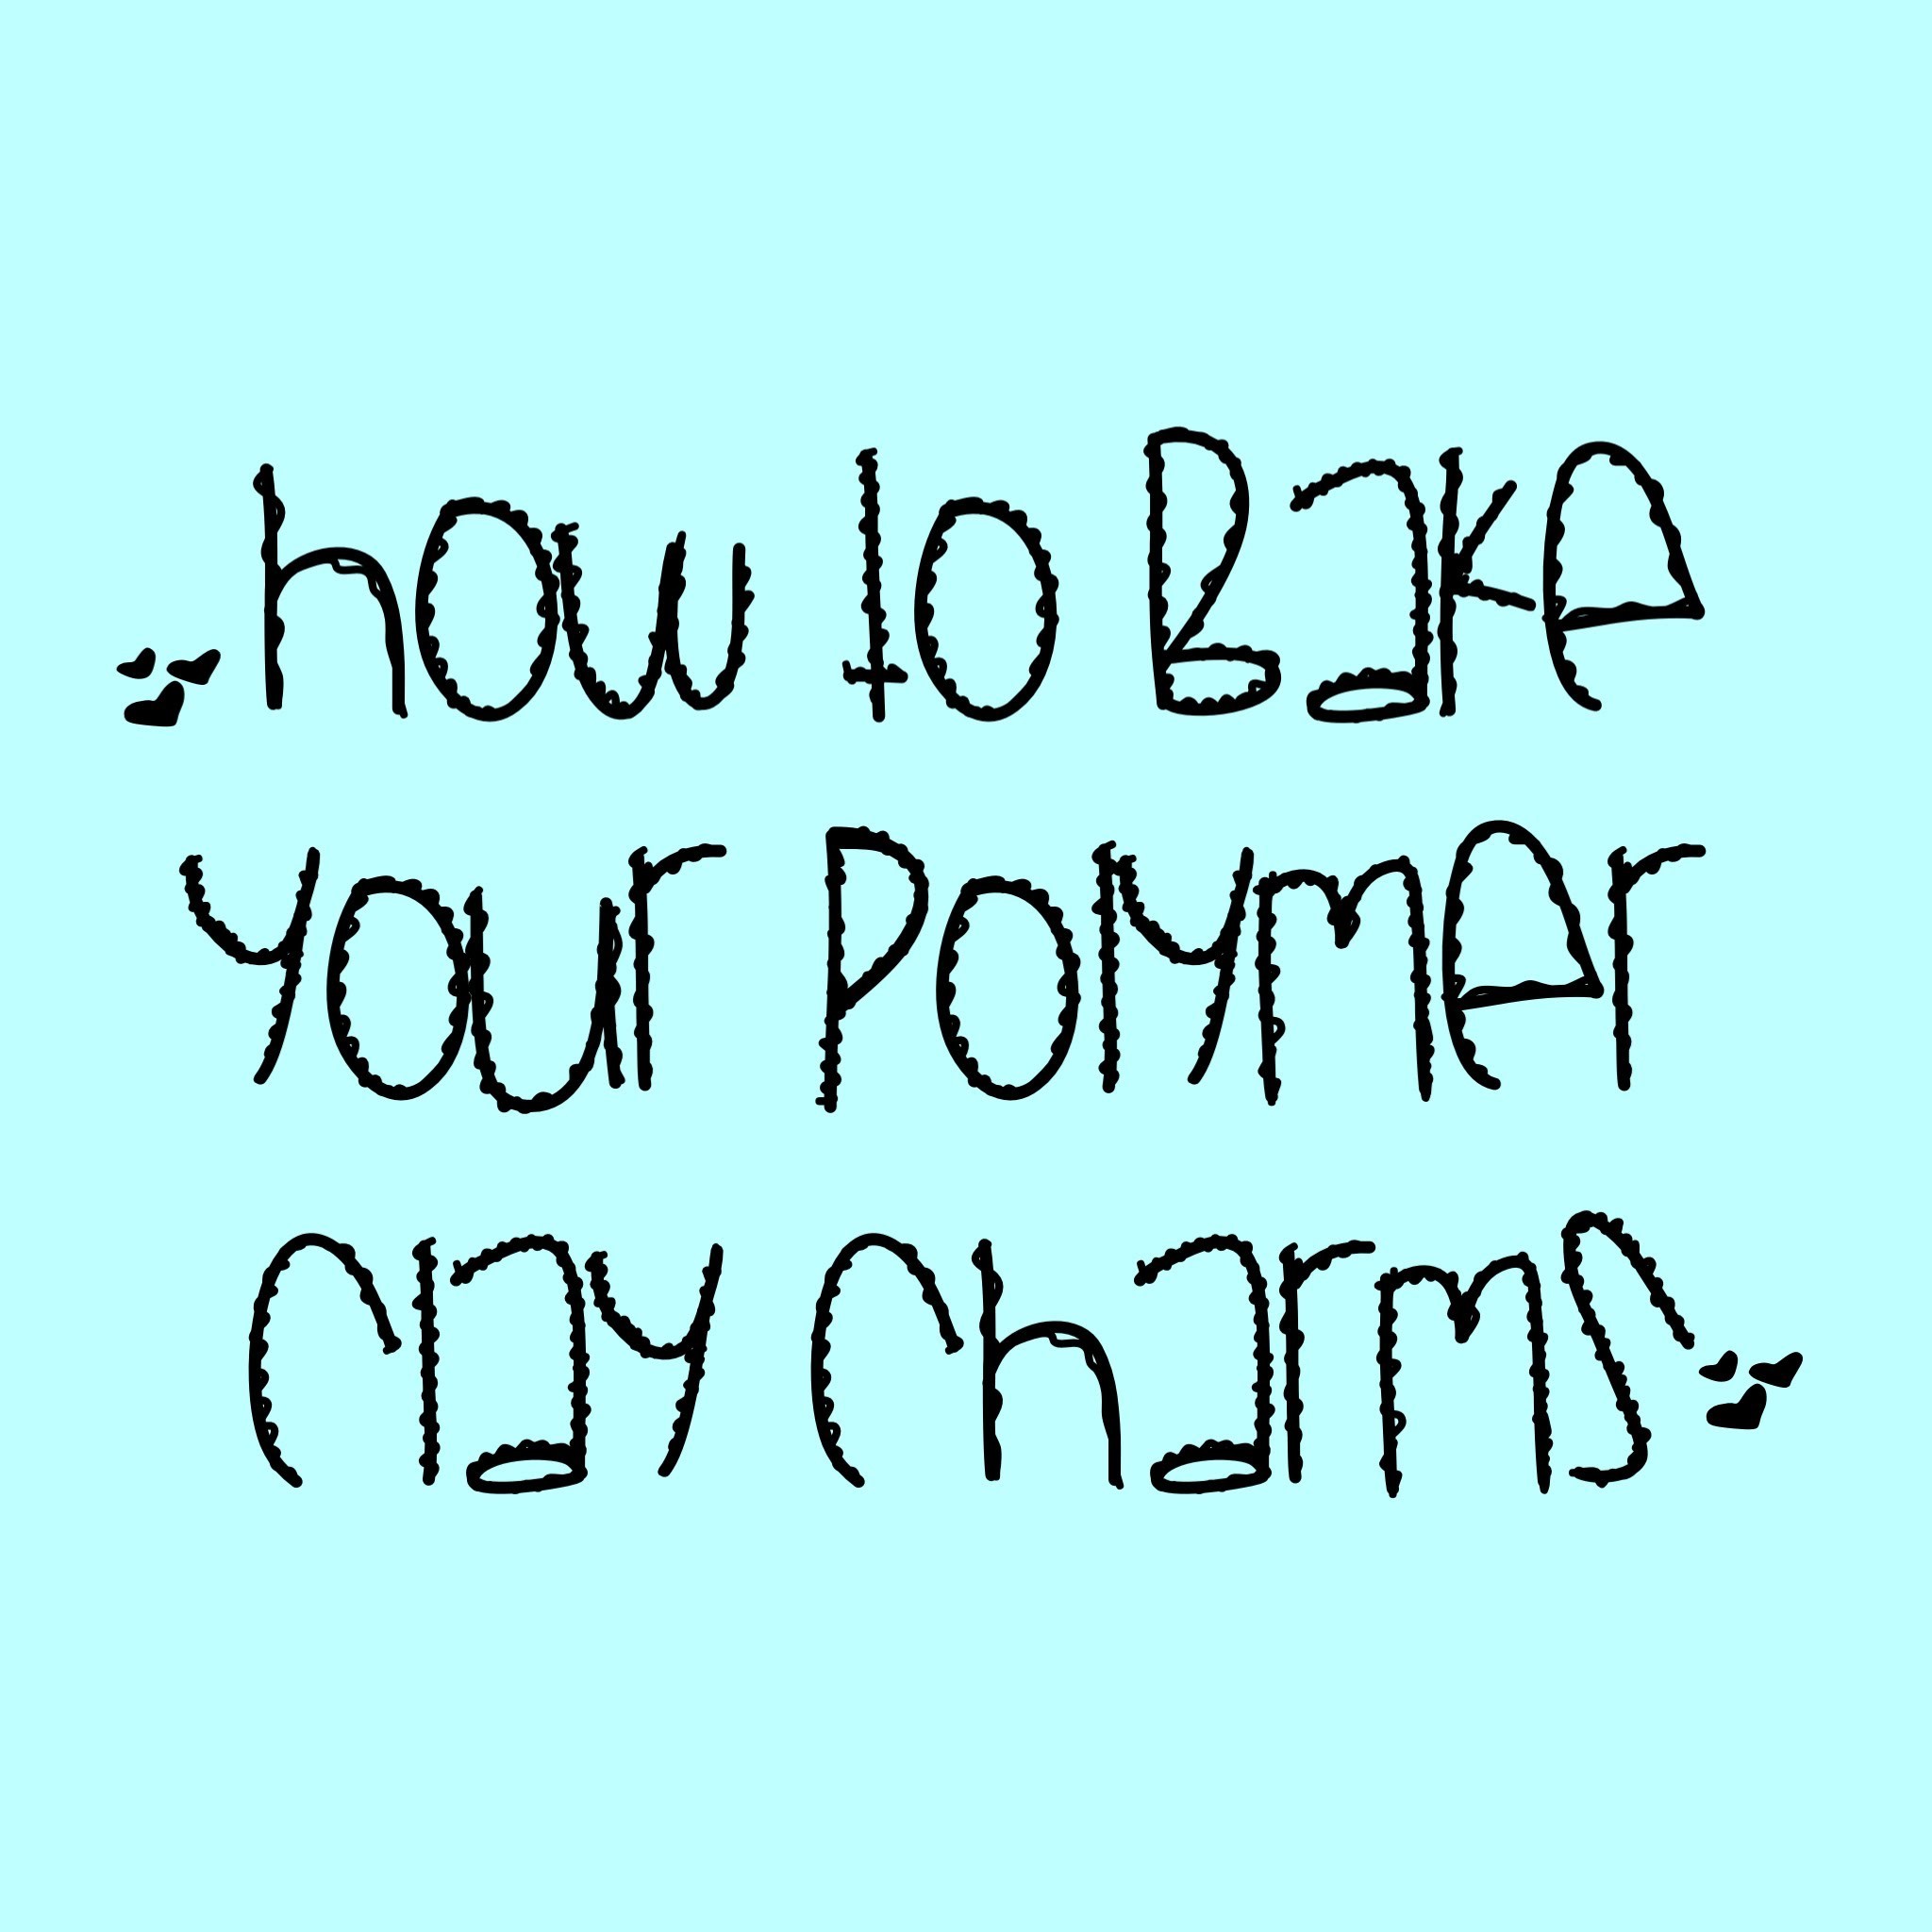 How to bake your Polymer Clay Charm